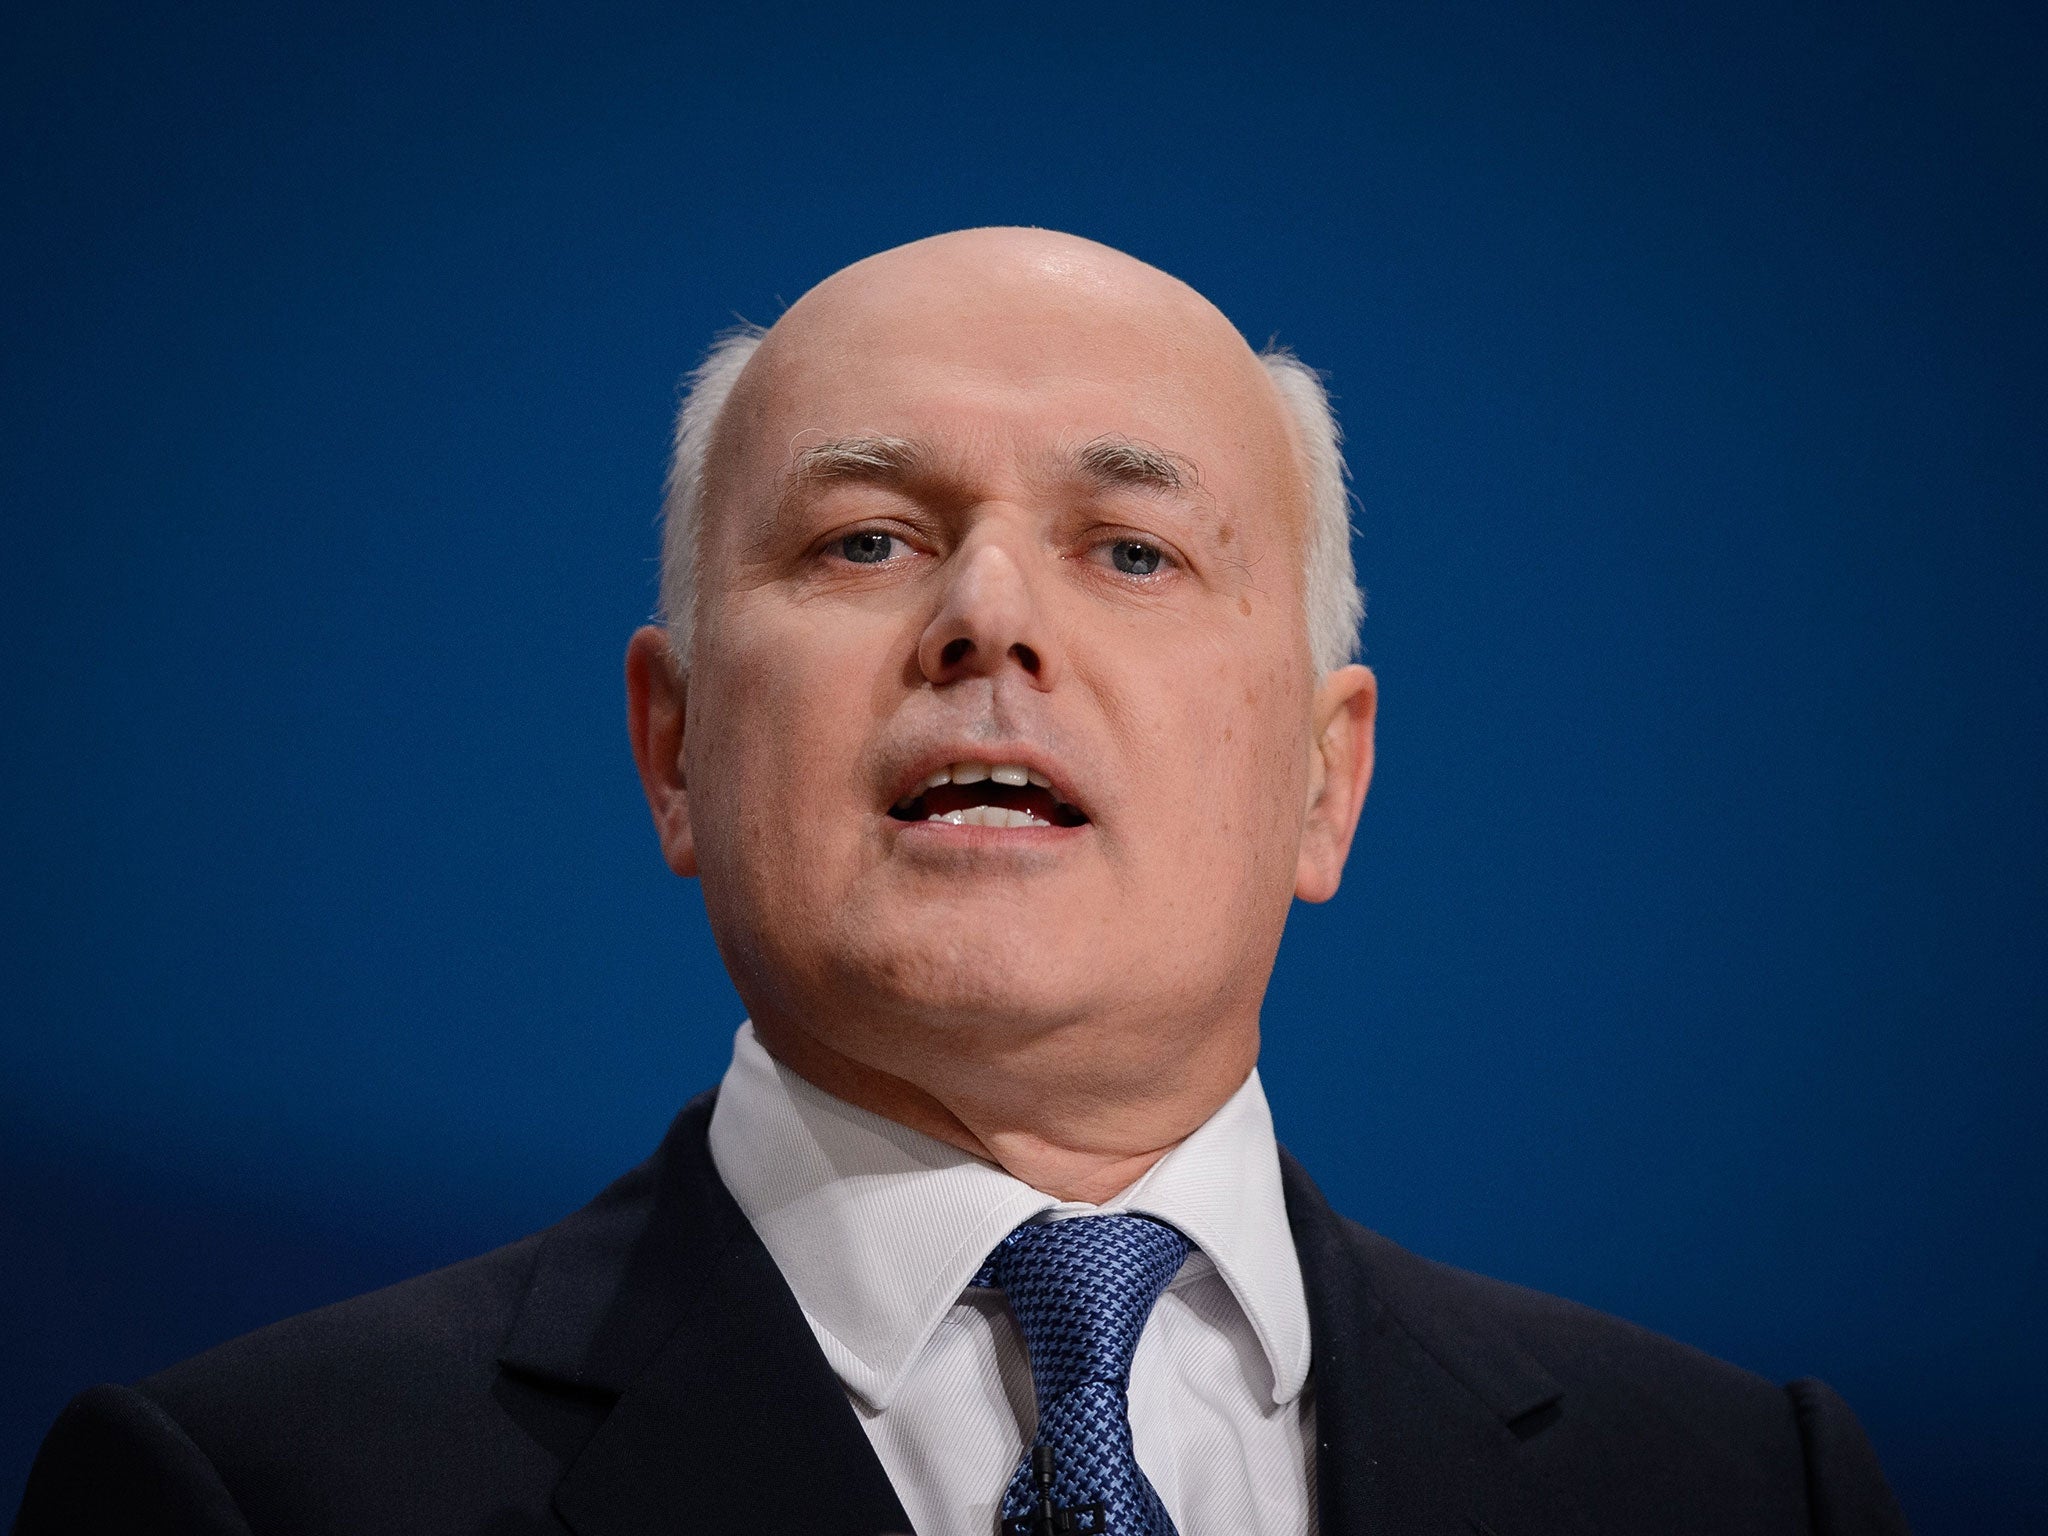 The committee will also oversee the moves by the Work and Pensions Secretary, Iain Duncan Smith, to cut the welfare bill